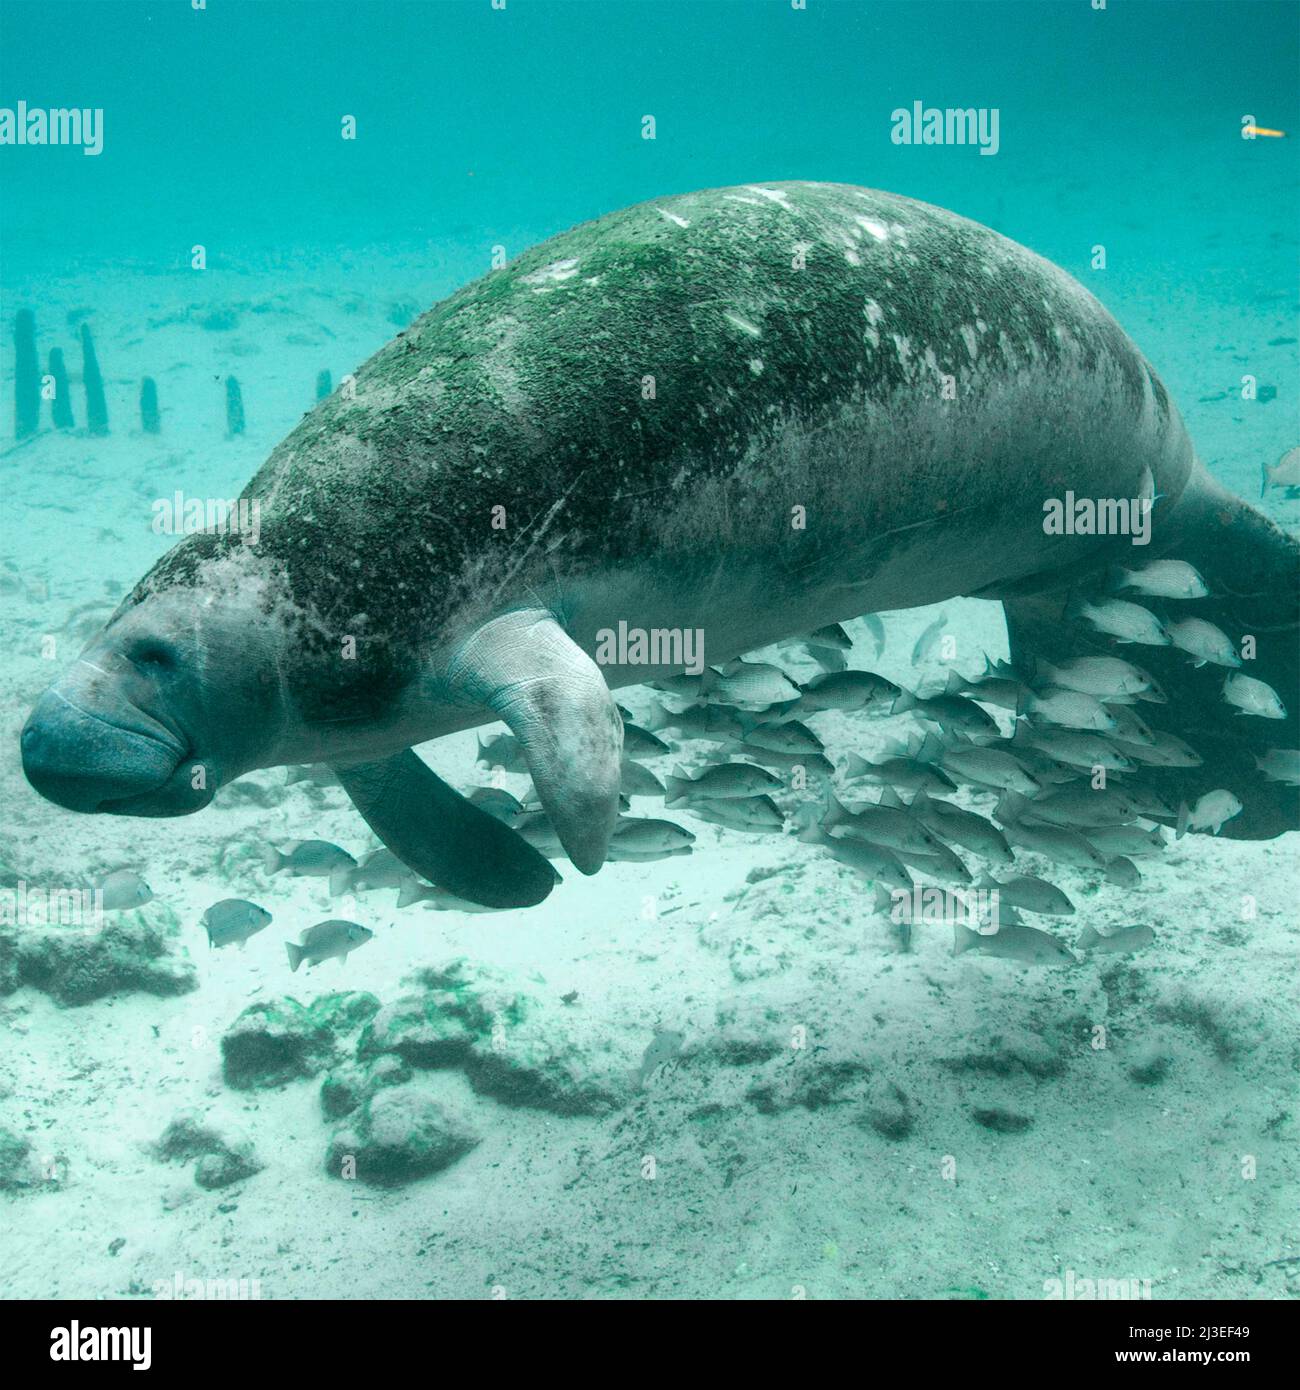 A Florida manatee, also known as a sea cow swims with fish in Florida Keys National Marine Sanctuary, in Key Largo, Florida. Stock Photo